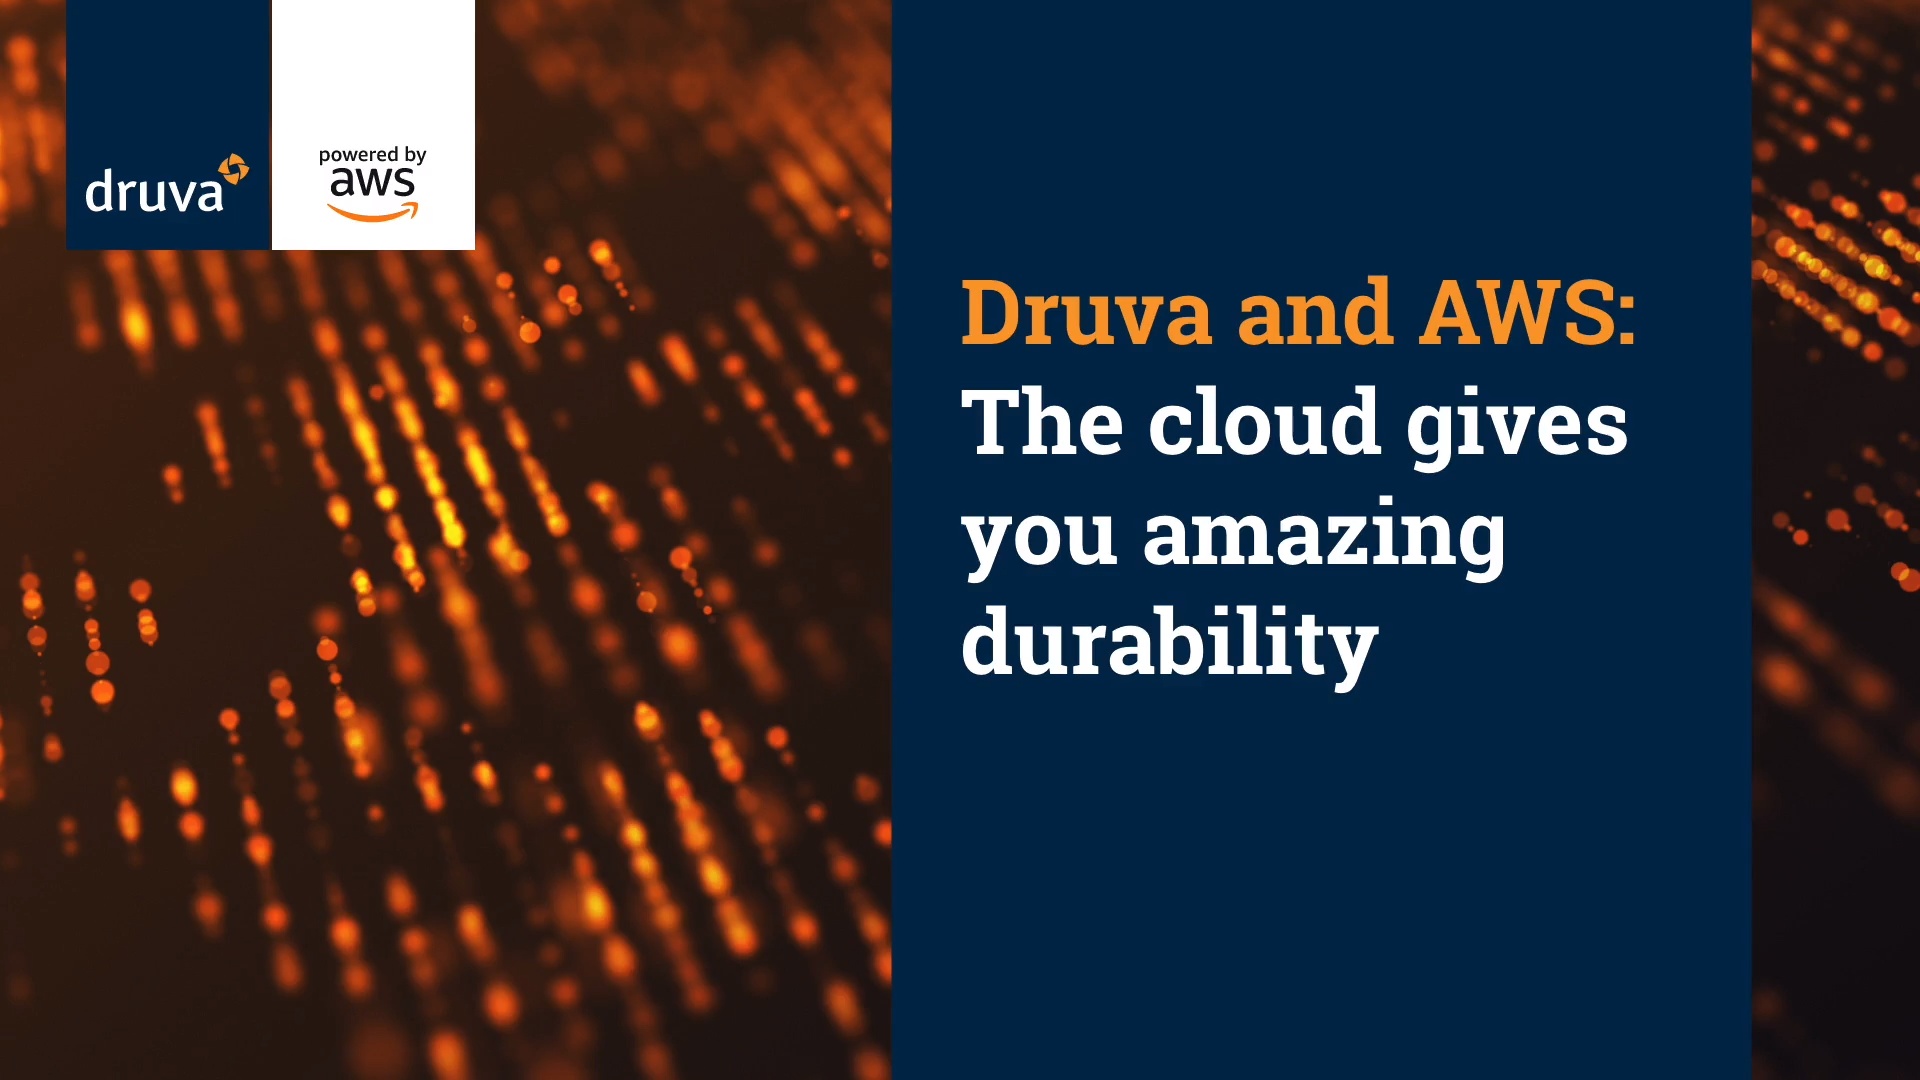 Druva and AWS: The cloud gives you amazing durability